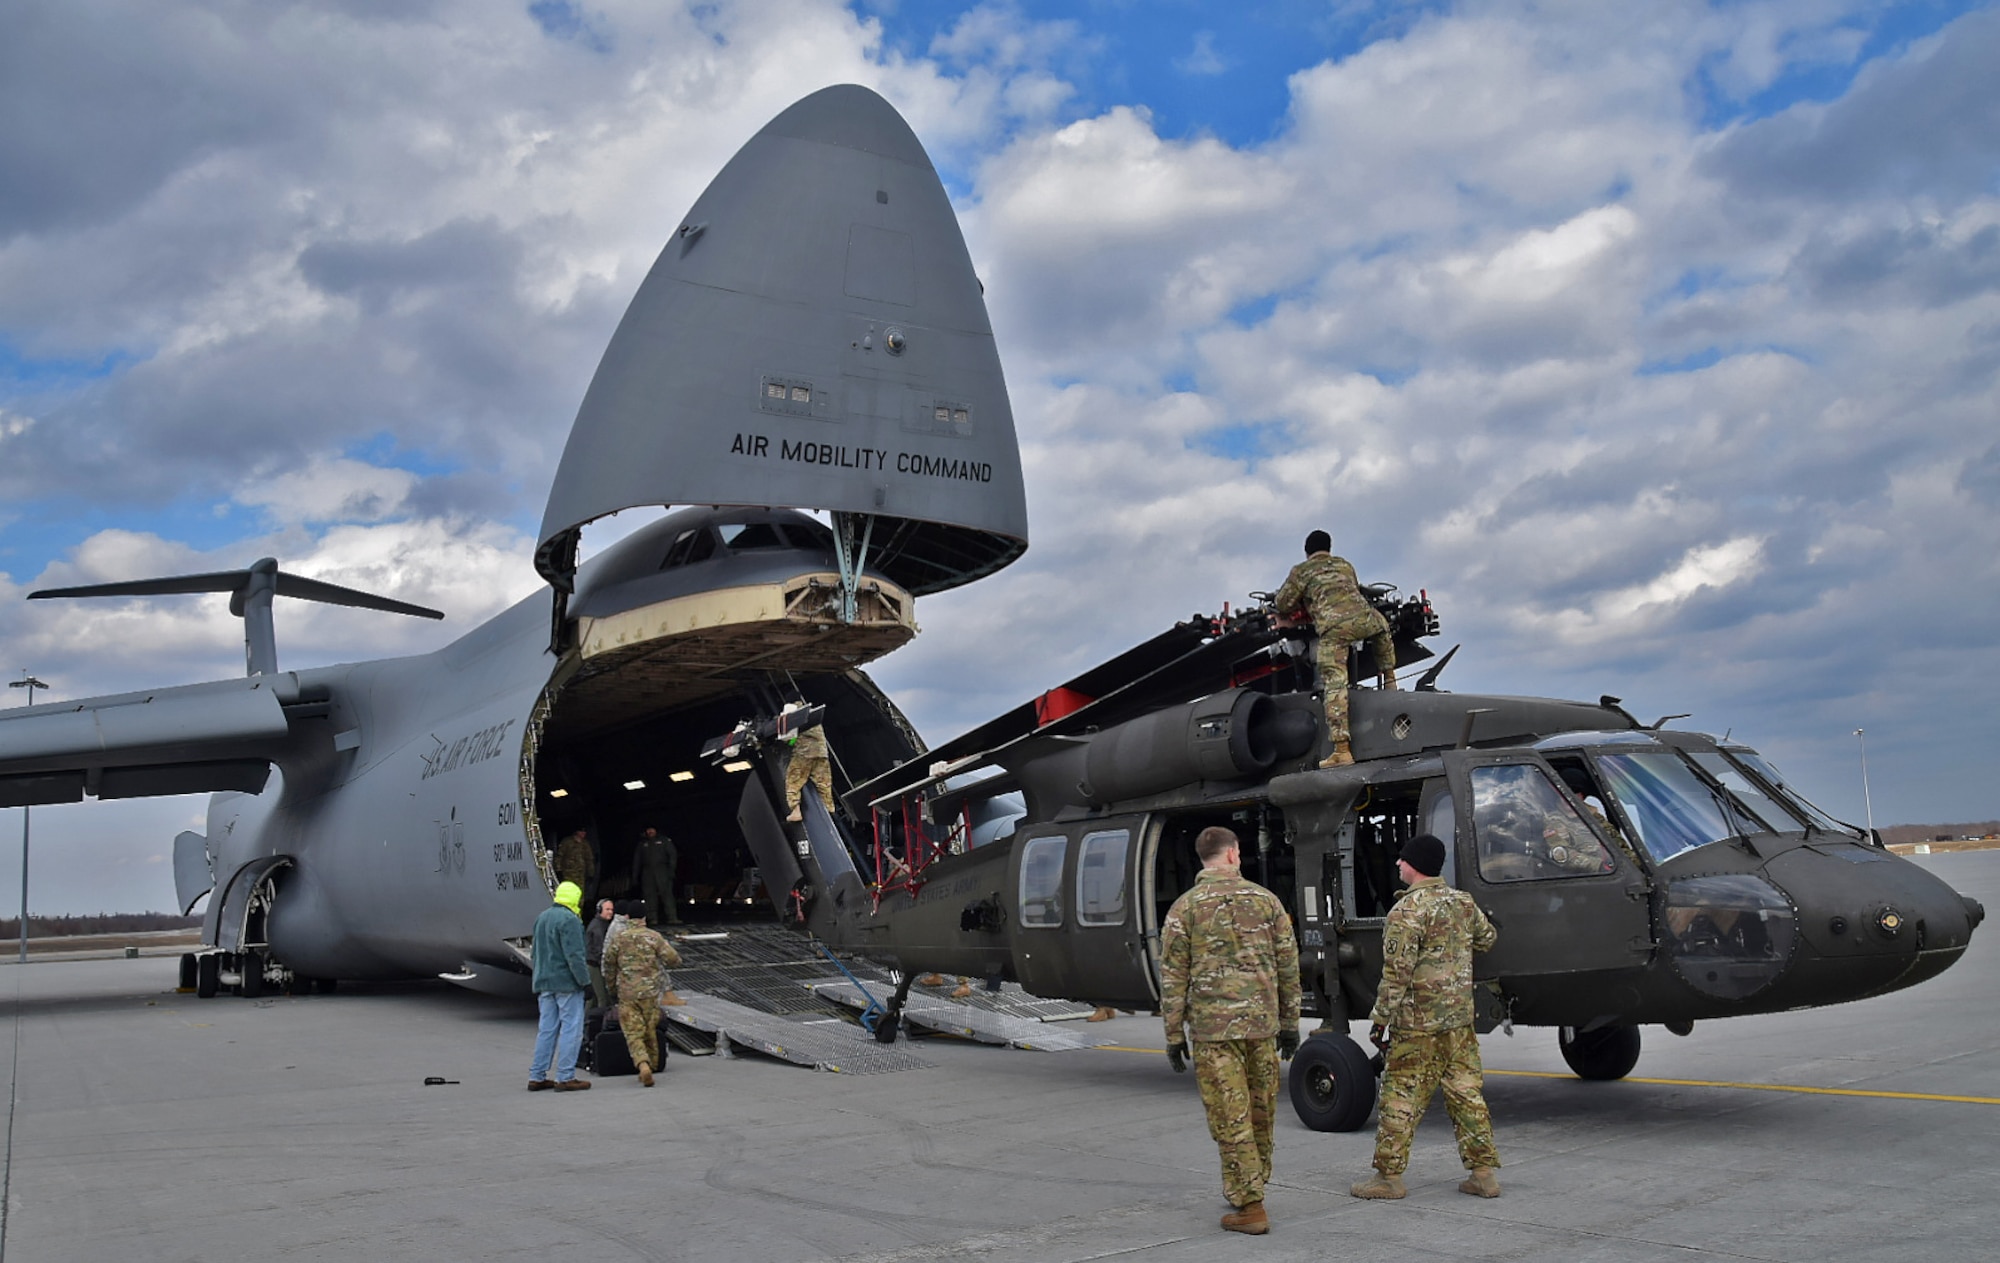 U.S. Army 10th Combat Aviation Brigade Soldiers prepare to load a UH-60 Blackhawk onto an Air Mobility Command C-5M Super Galaxy flown by the Air Force Reserve Command's 68th Airlift Squadron Feb. 27, 2017 on Ft. Drum, N.Y. in support of Operation Atlantic Resolve. (U.S. Air Force photo/Tech. Sgt. Carlos J. Trevino)